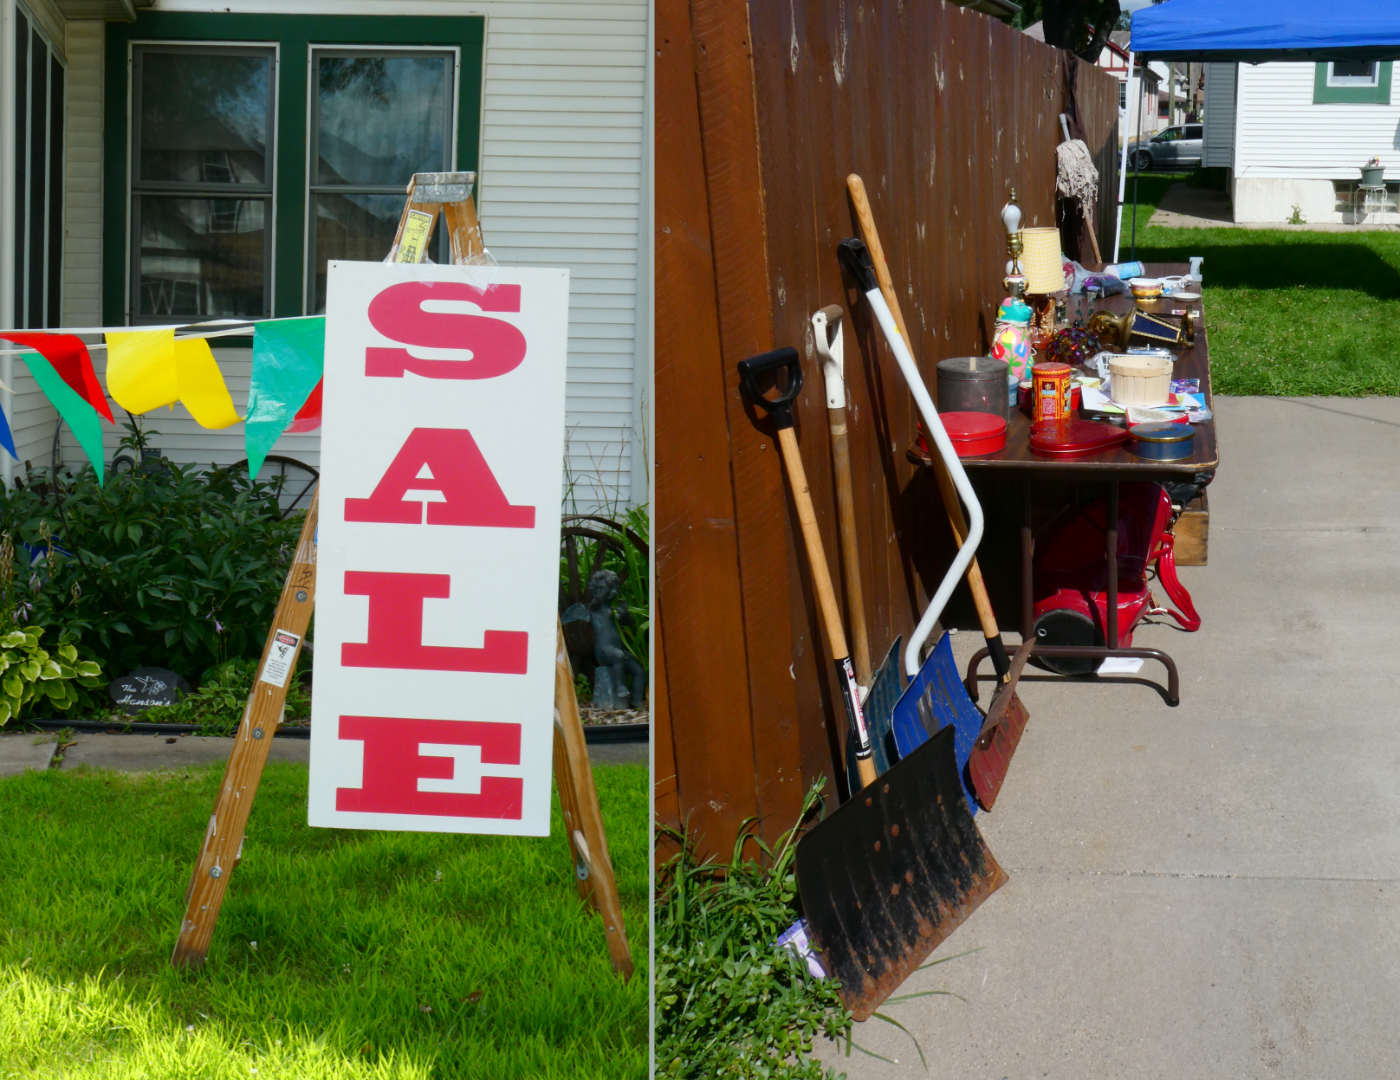 SALE sign on side of a wooden ladder with colored flags next to a fence with yard tools and a table of many items